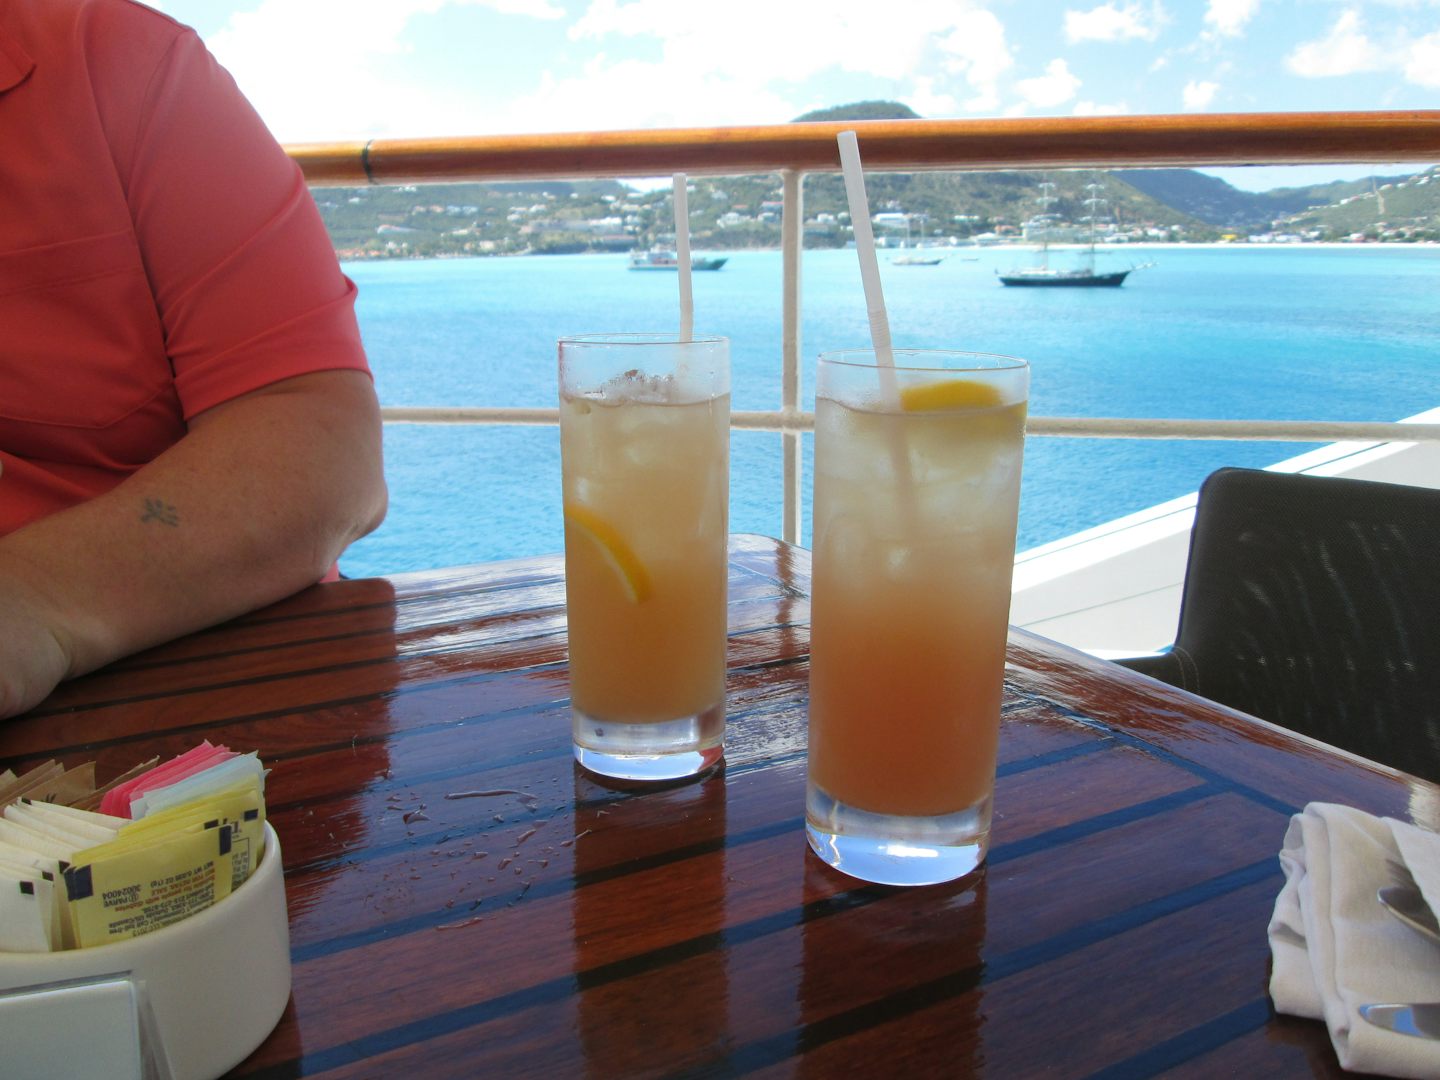 We loved the "drink of the day" especially the Bon Voyage cocktail!